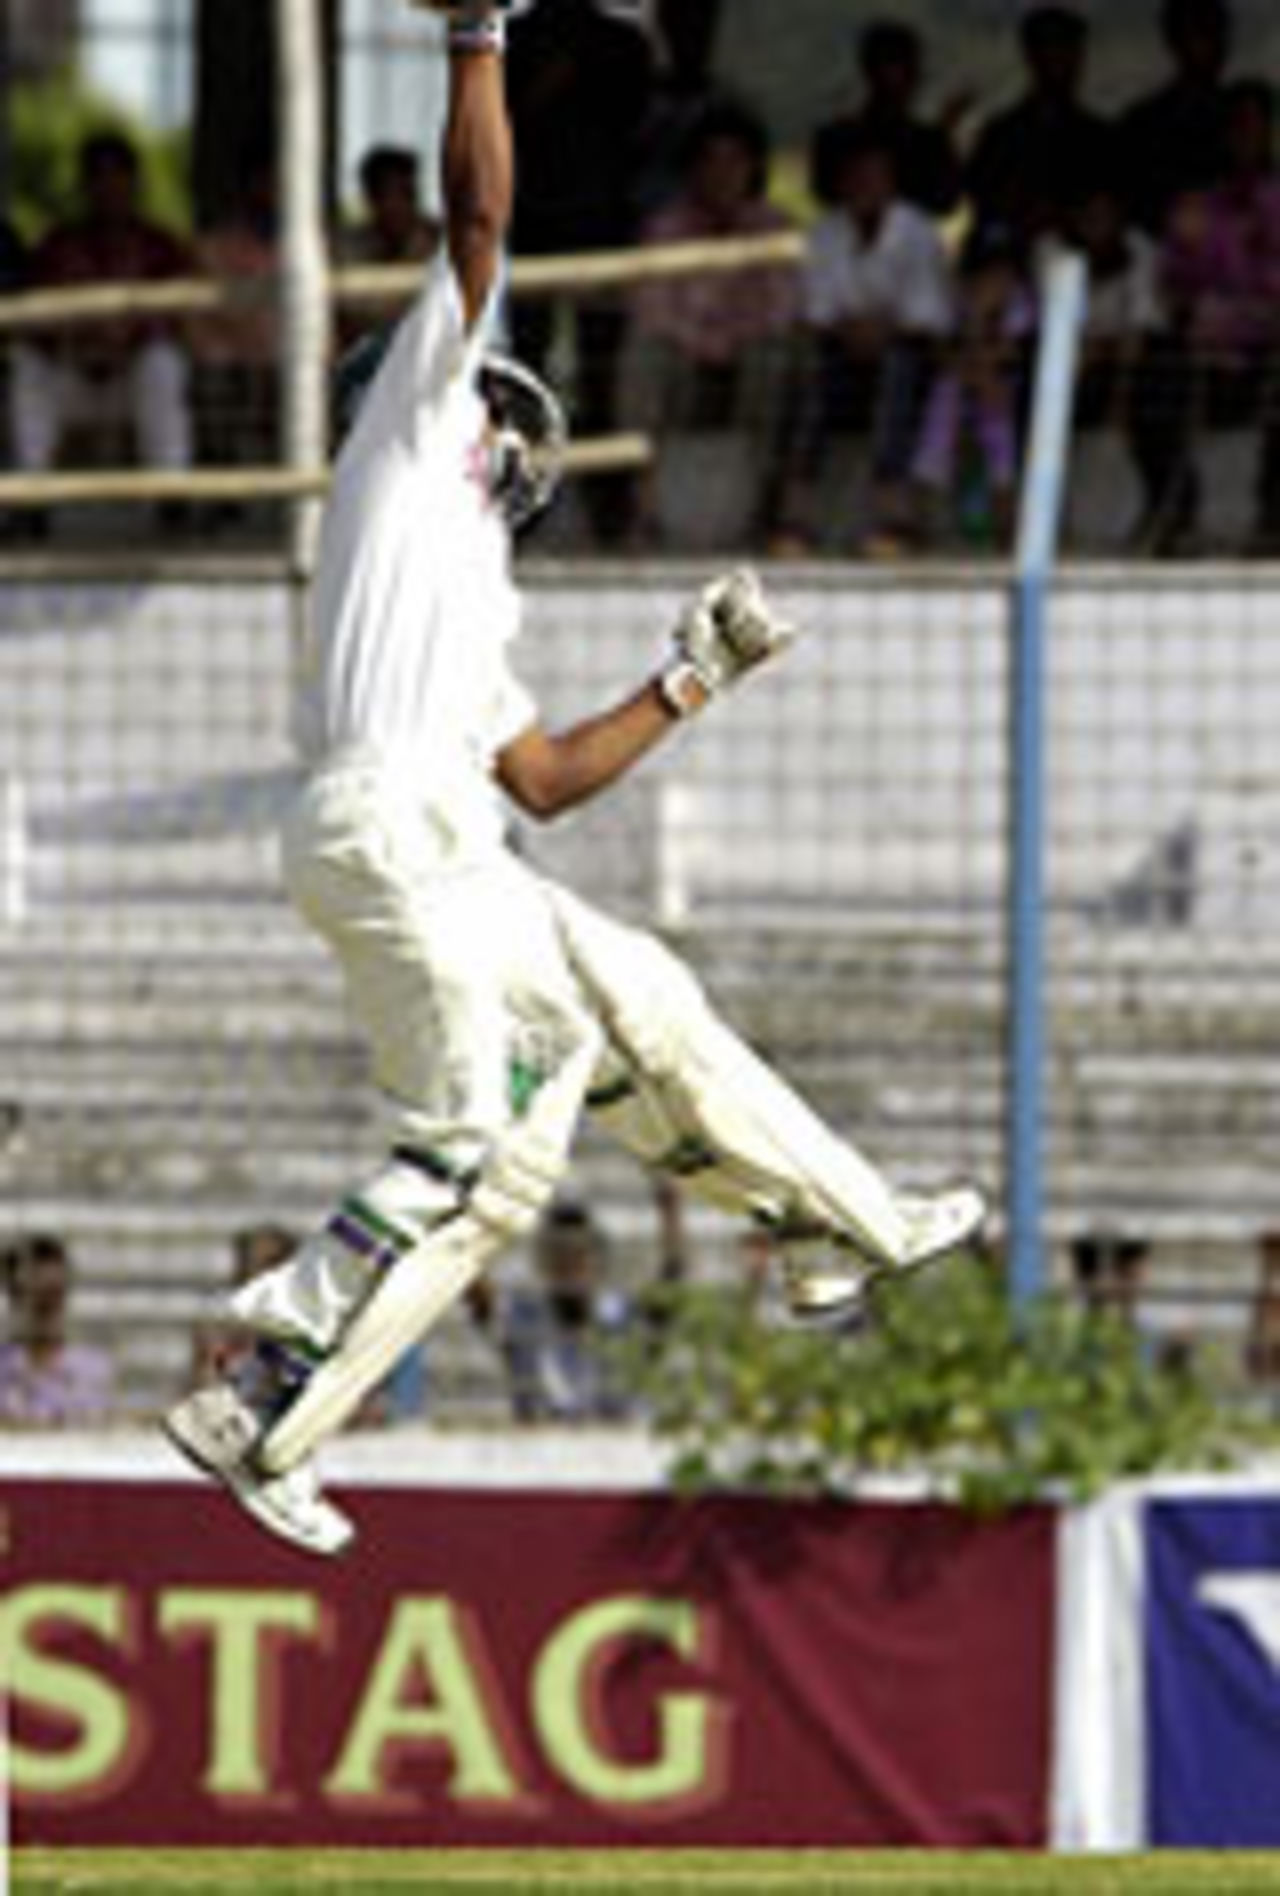 Mohammad Ashraful jumps after reaching his century, Bangladesh v India, 2nd Test, Chittagong, 3rd day, December 19 2004